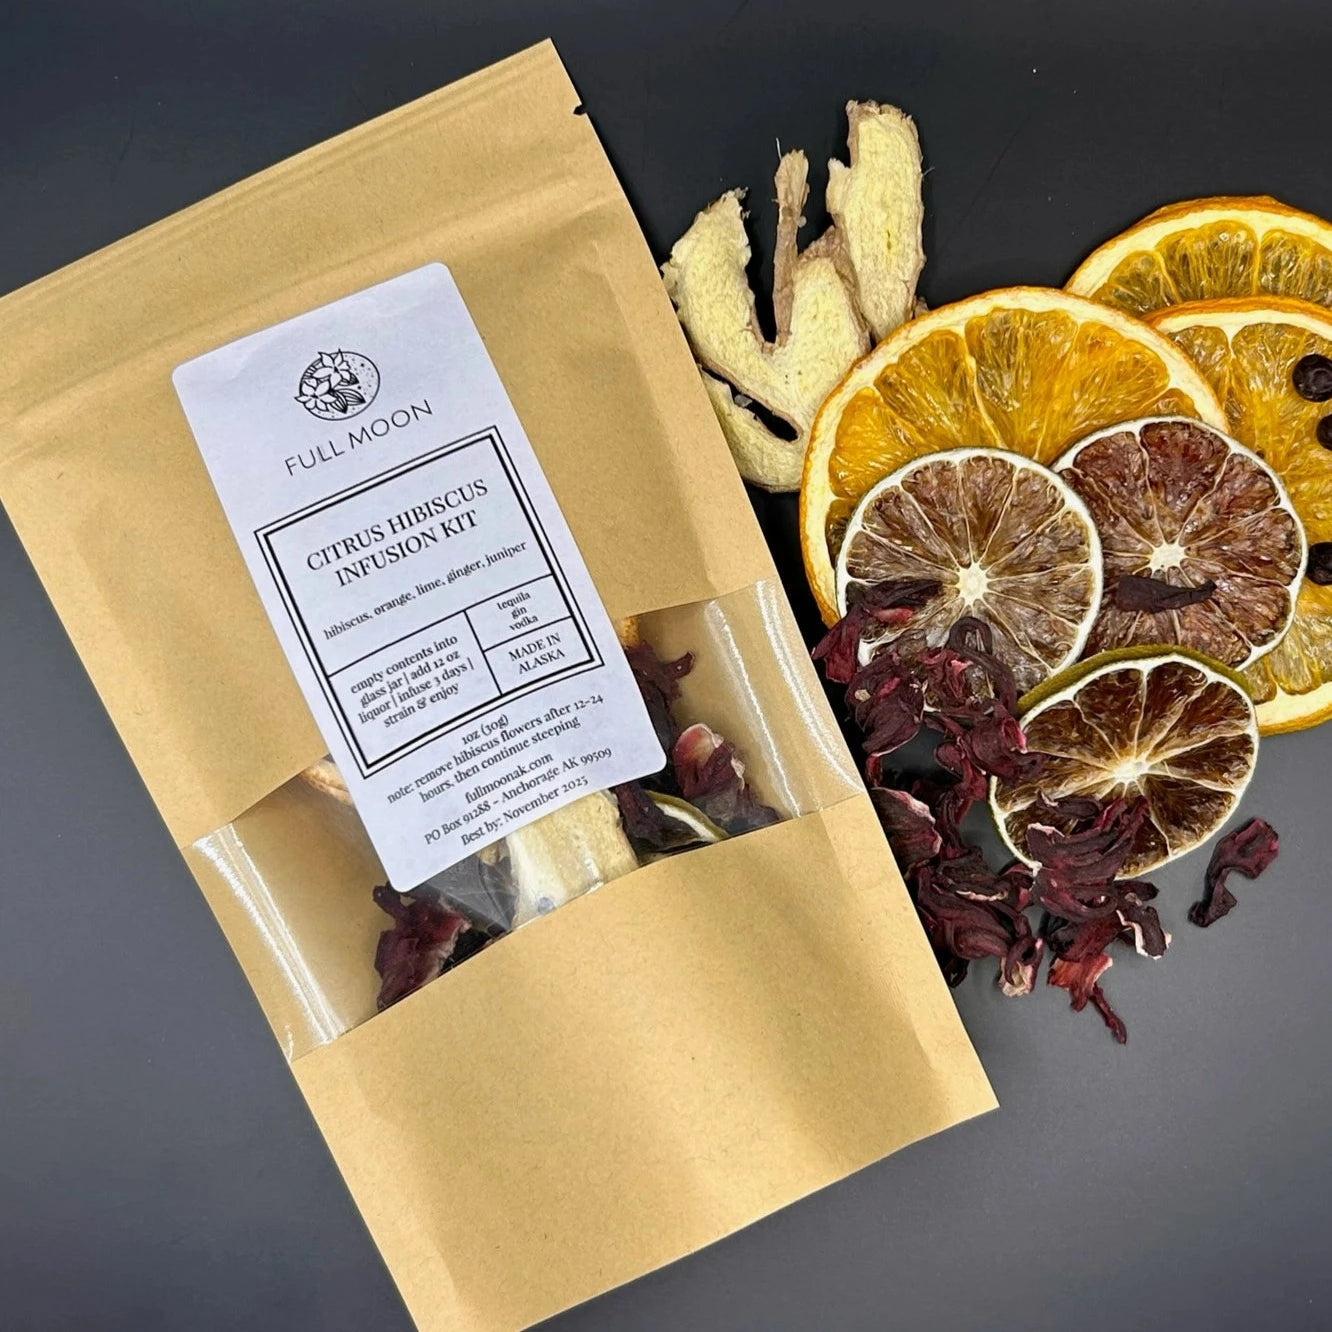 Citrus Hibiscus Infusion Kit by Full Moon